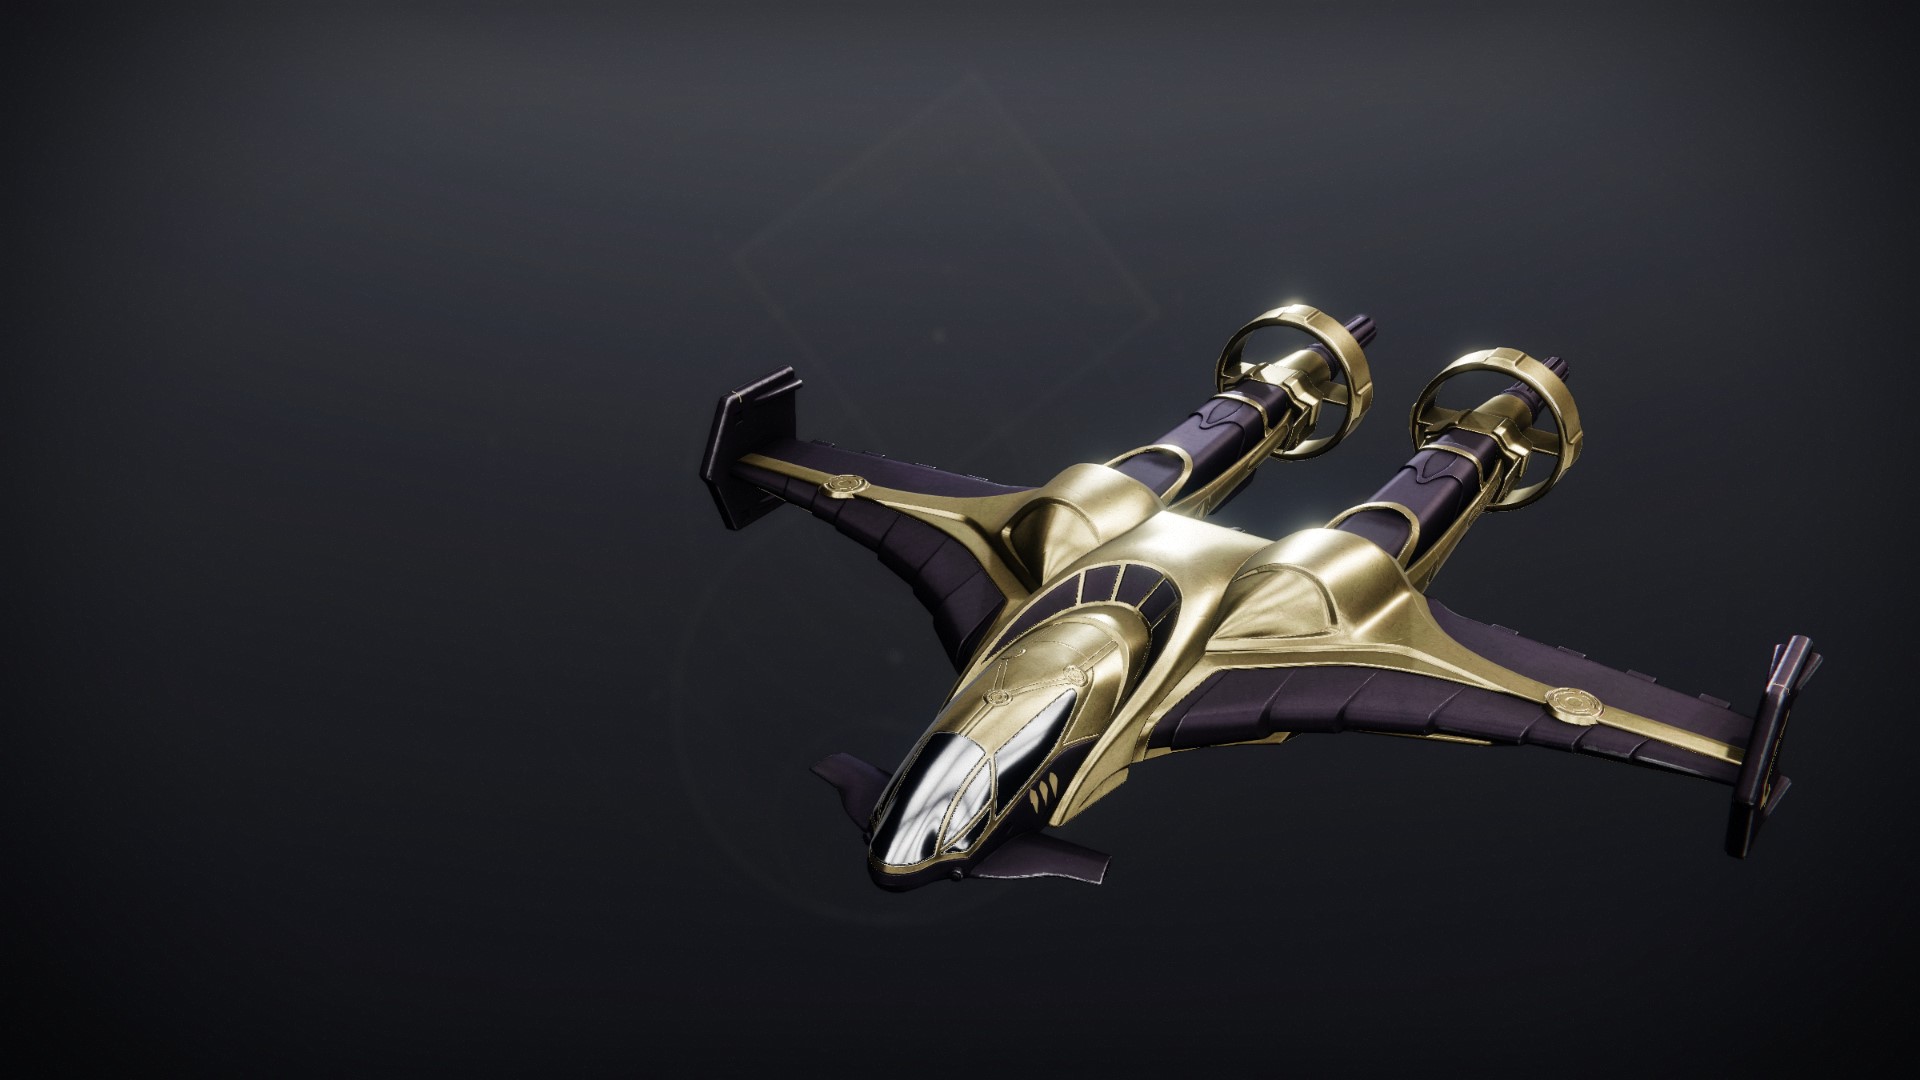 An in-game render of the Centerfire.